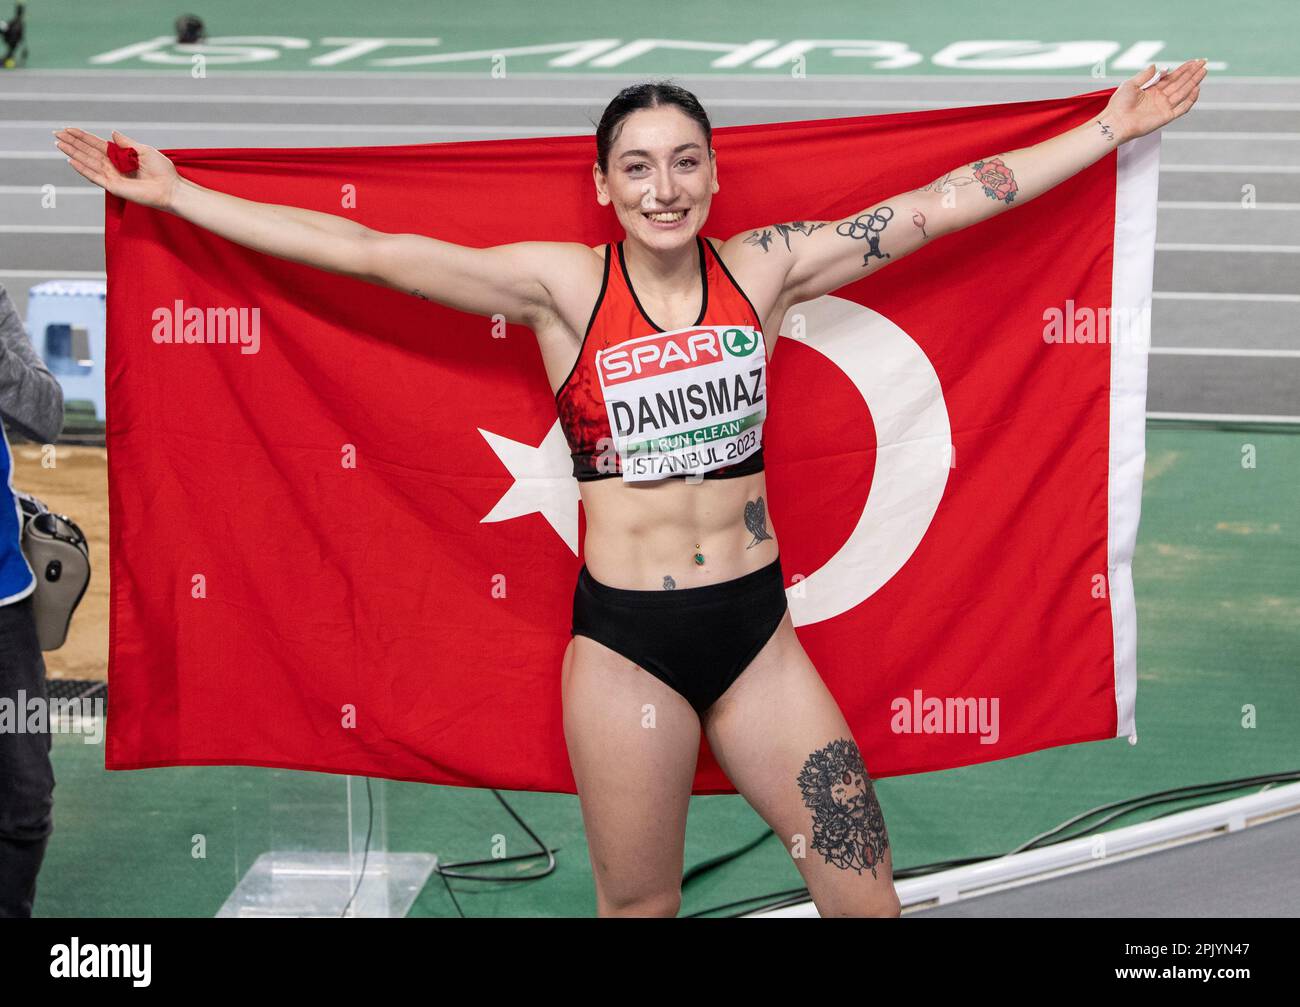 https://c8.alamy.com/comp/2PJYN47/tuba-danismaz-of-turkey-competing-in-the-womens-triple-jump-final-at-the-european-indoor-athletics-championships-at-ataky-athletics-arena-in-istanb-2PJYN47.jpg